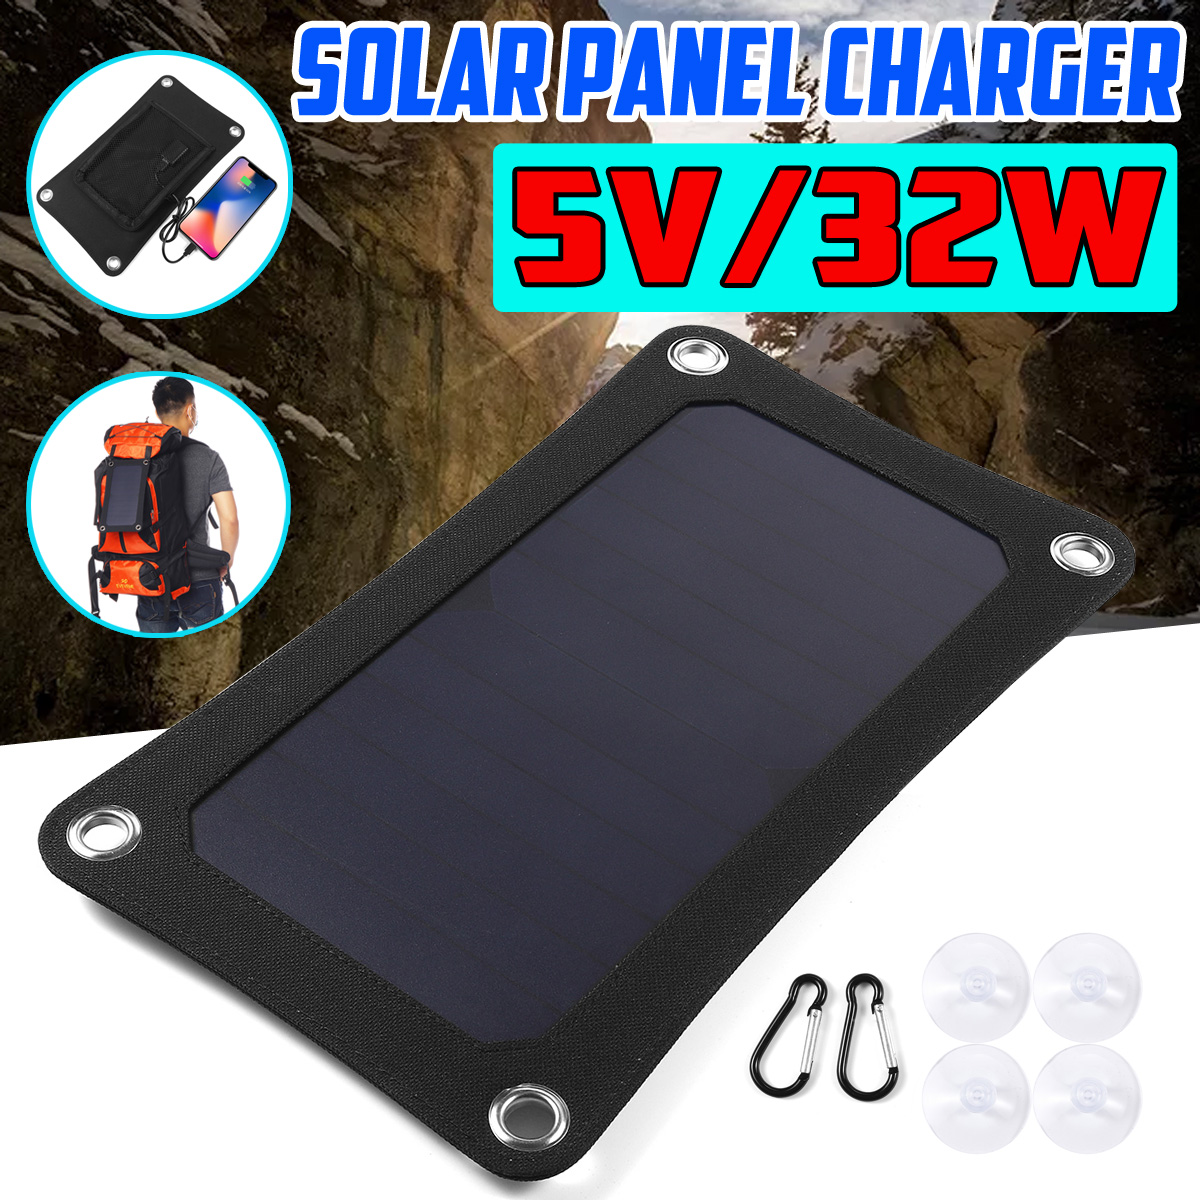 SUNPOWER-32W-5V-High-Efficiency-Solar-Panel-Charger-USB-Backpack-Solar-Power-Bank-for-Outdoor-Campin-1726253-2